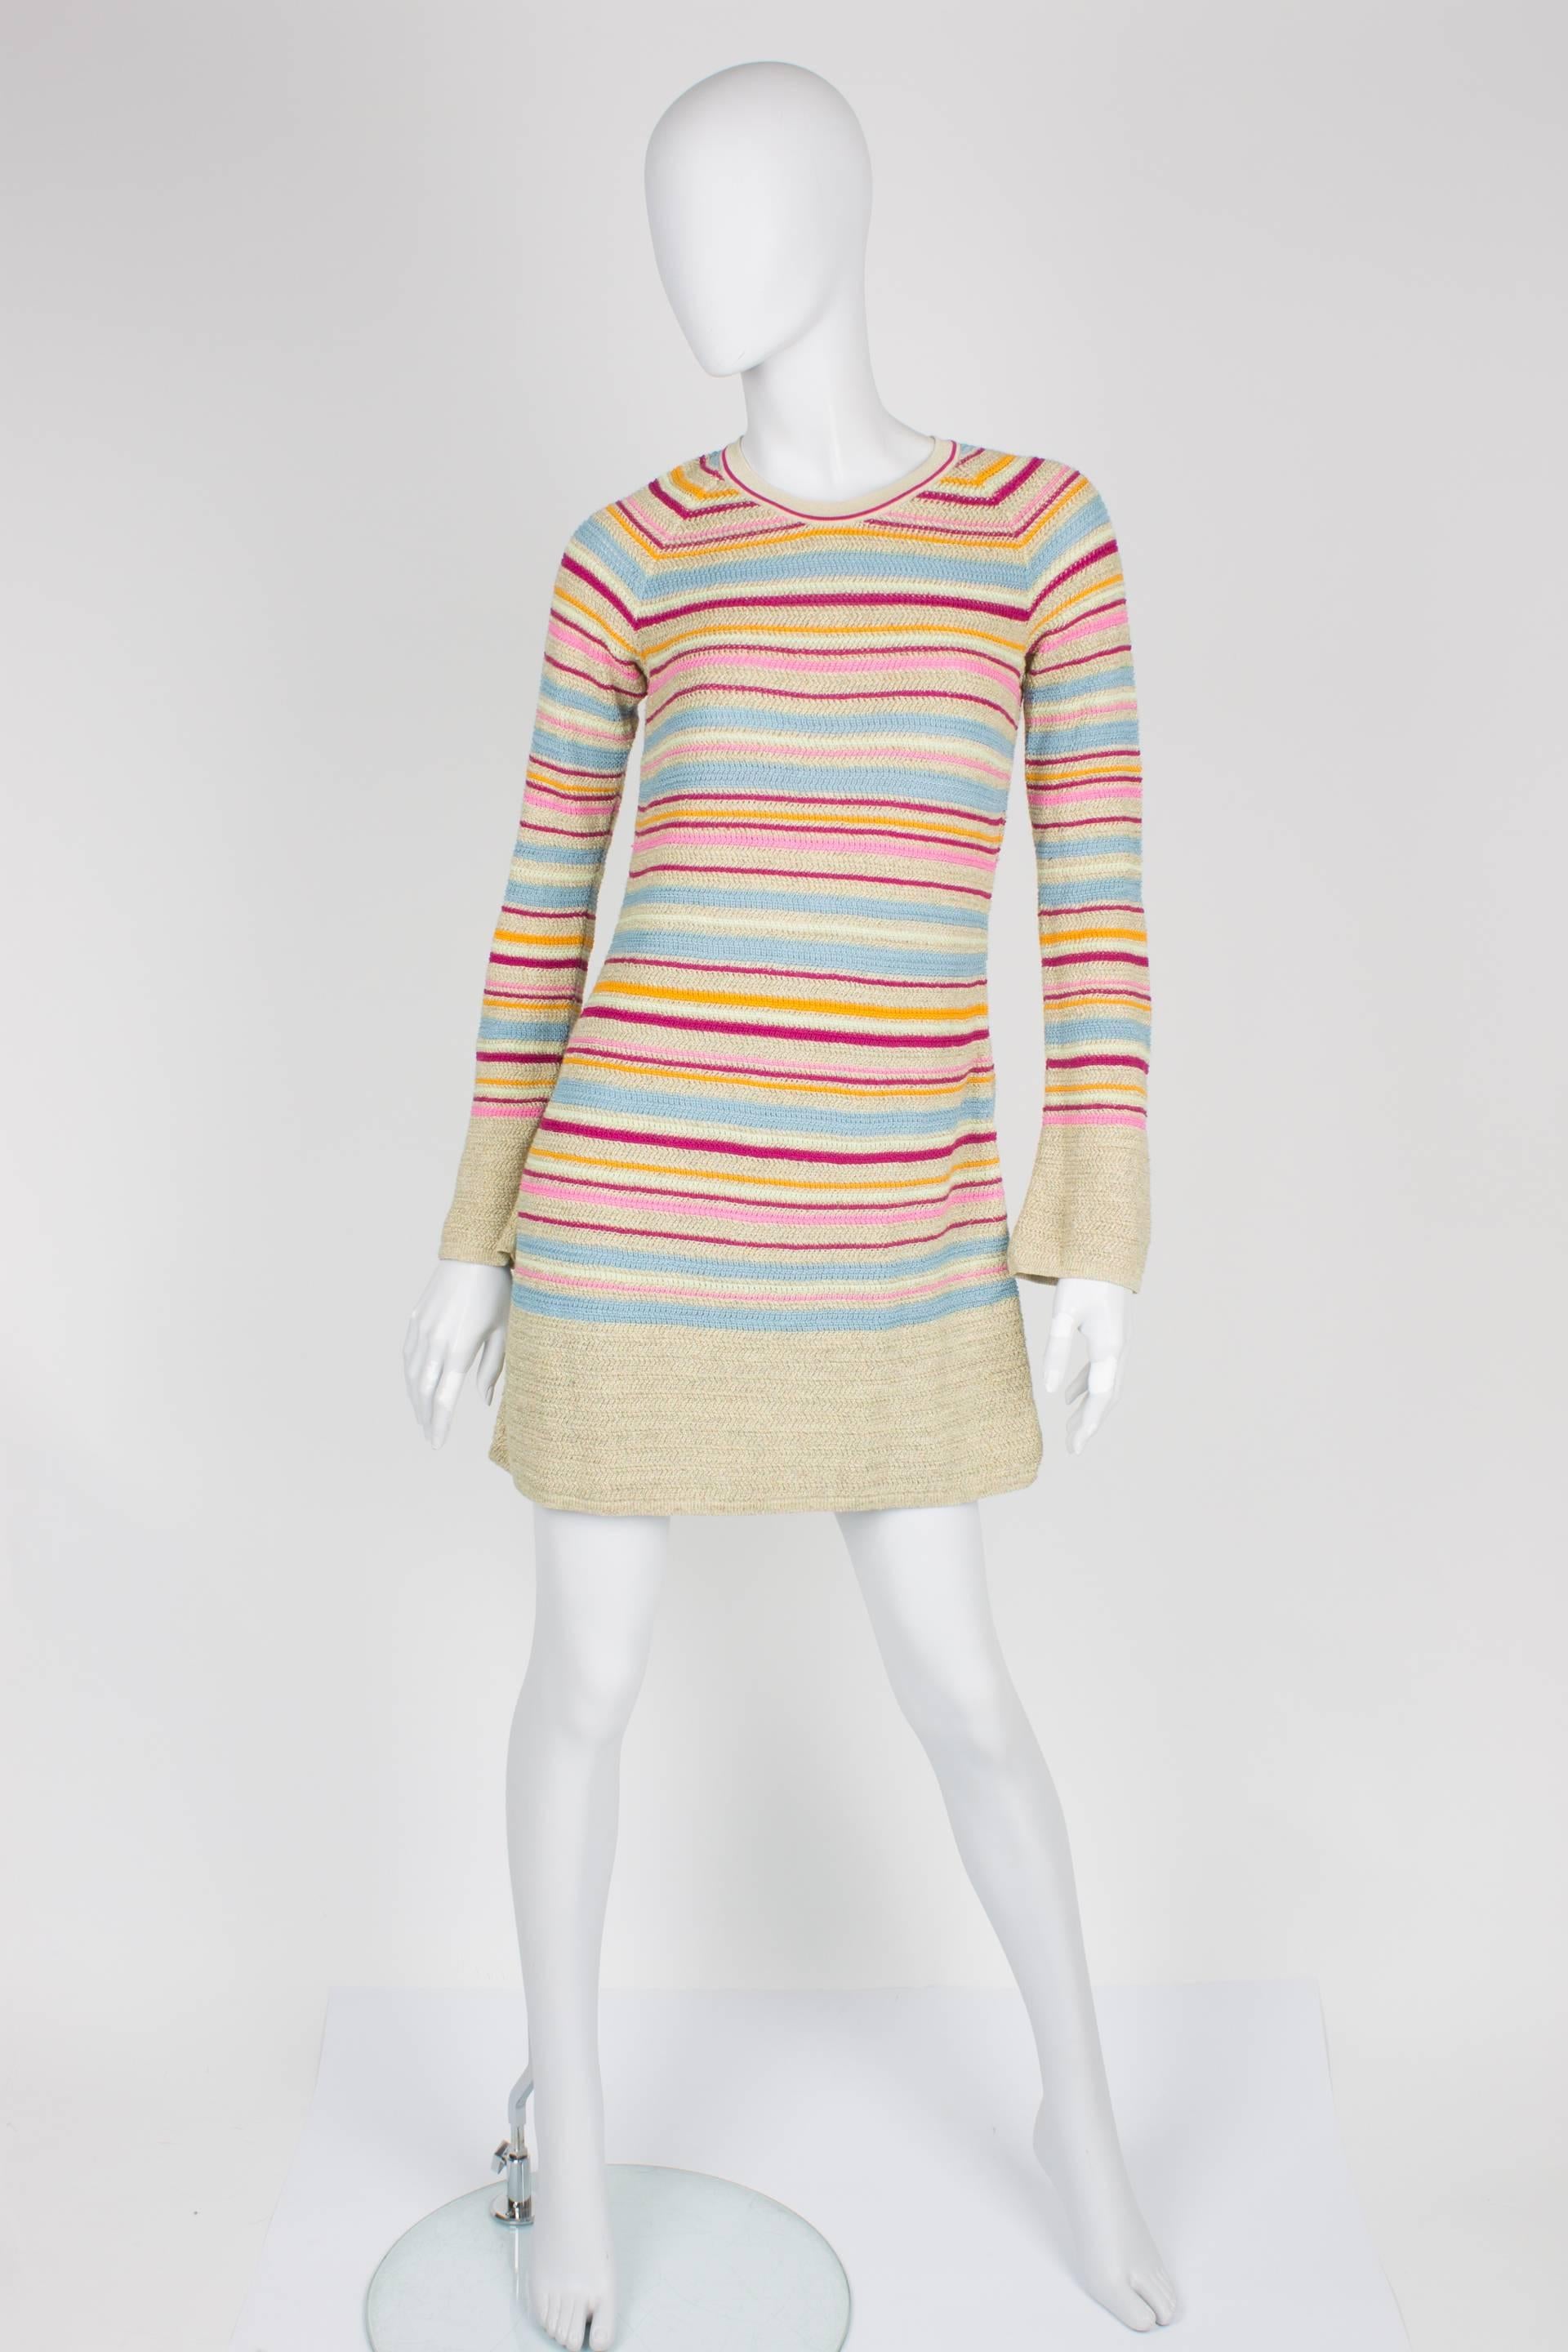 

Short dress by Chanel from the Resort Collection of 2011. We love the candy colors!

Long sleeved knit dress in multi-color: light blue, pink, orange and fuchsia. Some golden thread is added for extra glamour. No lining. Closure in the back of the